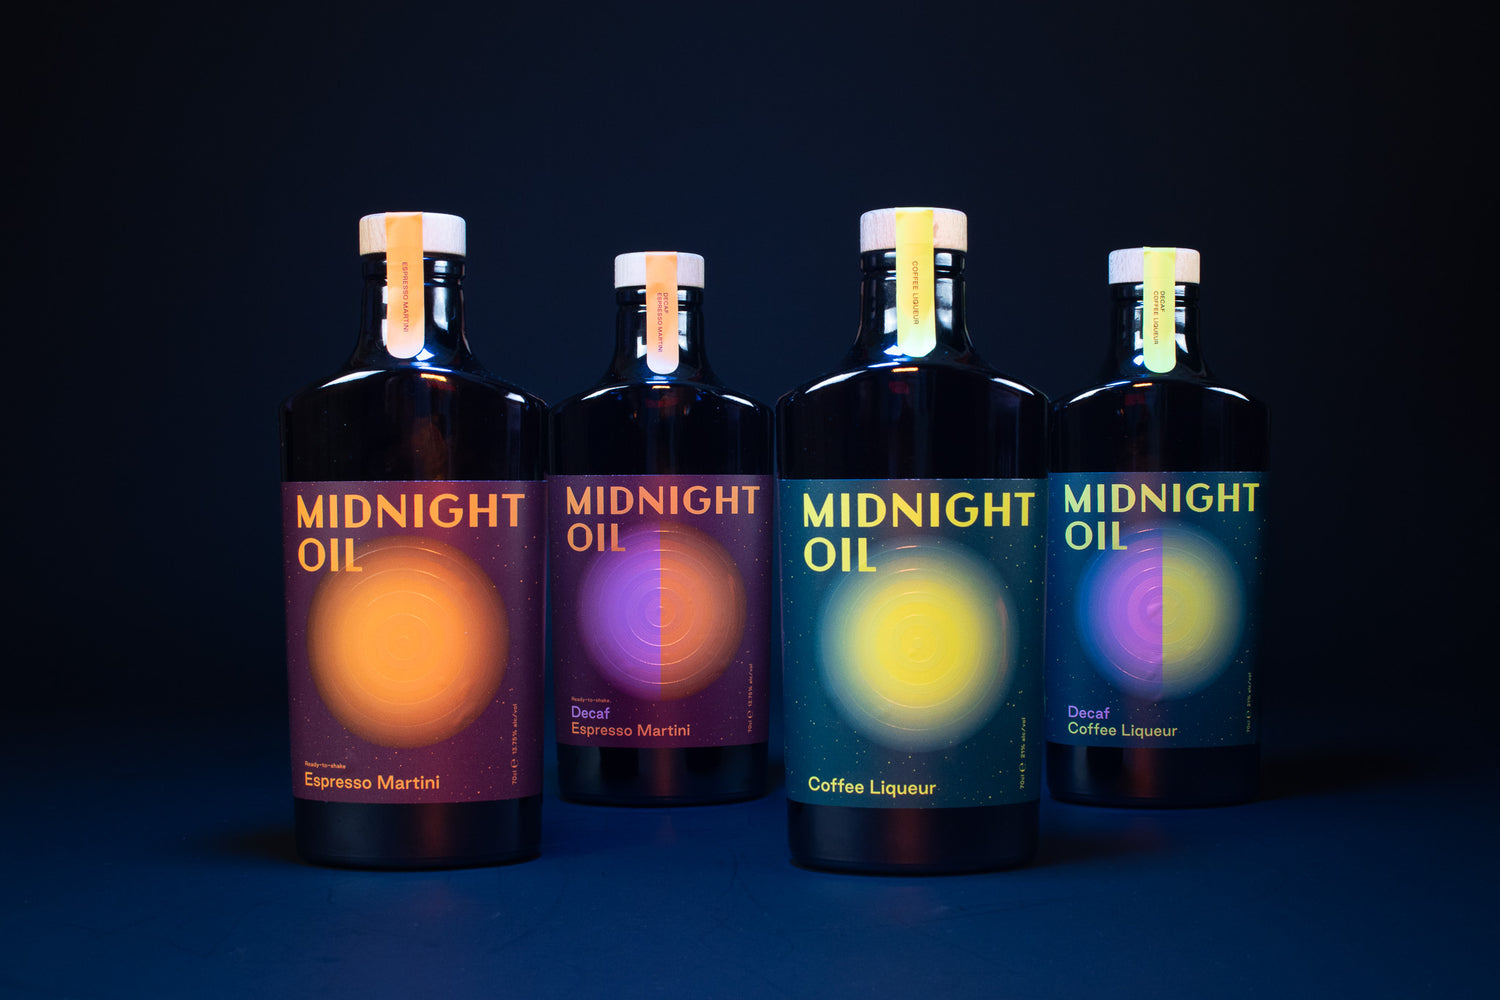 Midnight Oil 2.0 - Introducing the Midnight Oil range - here’s what’s new